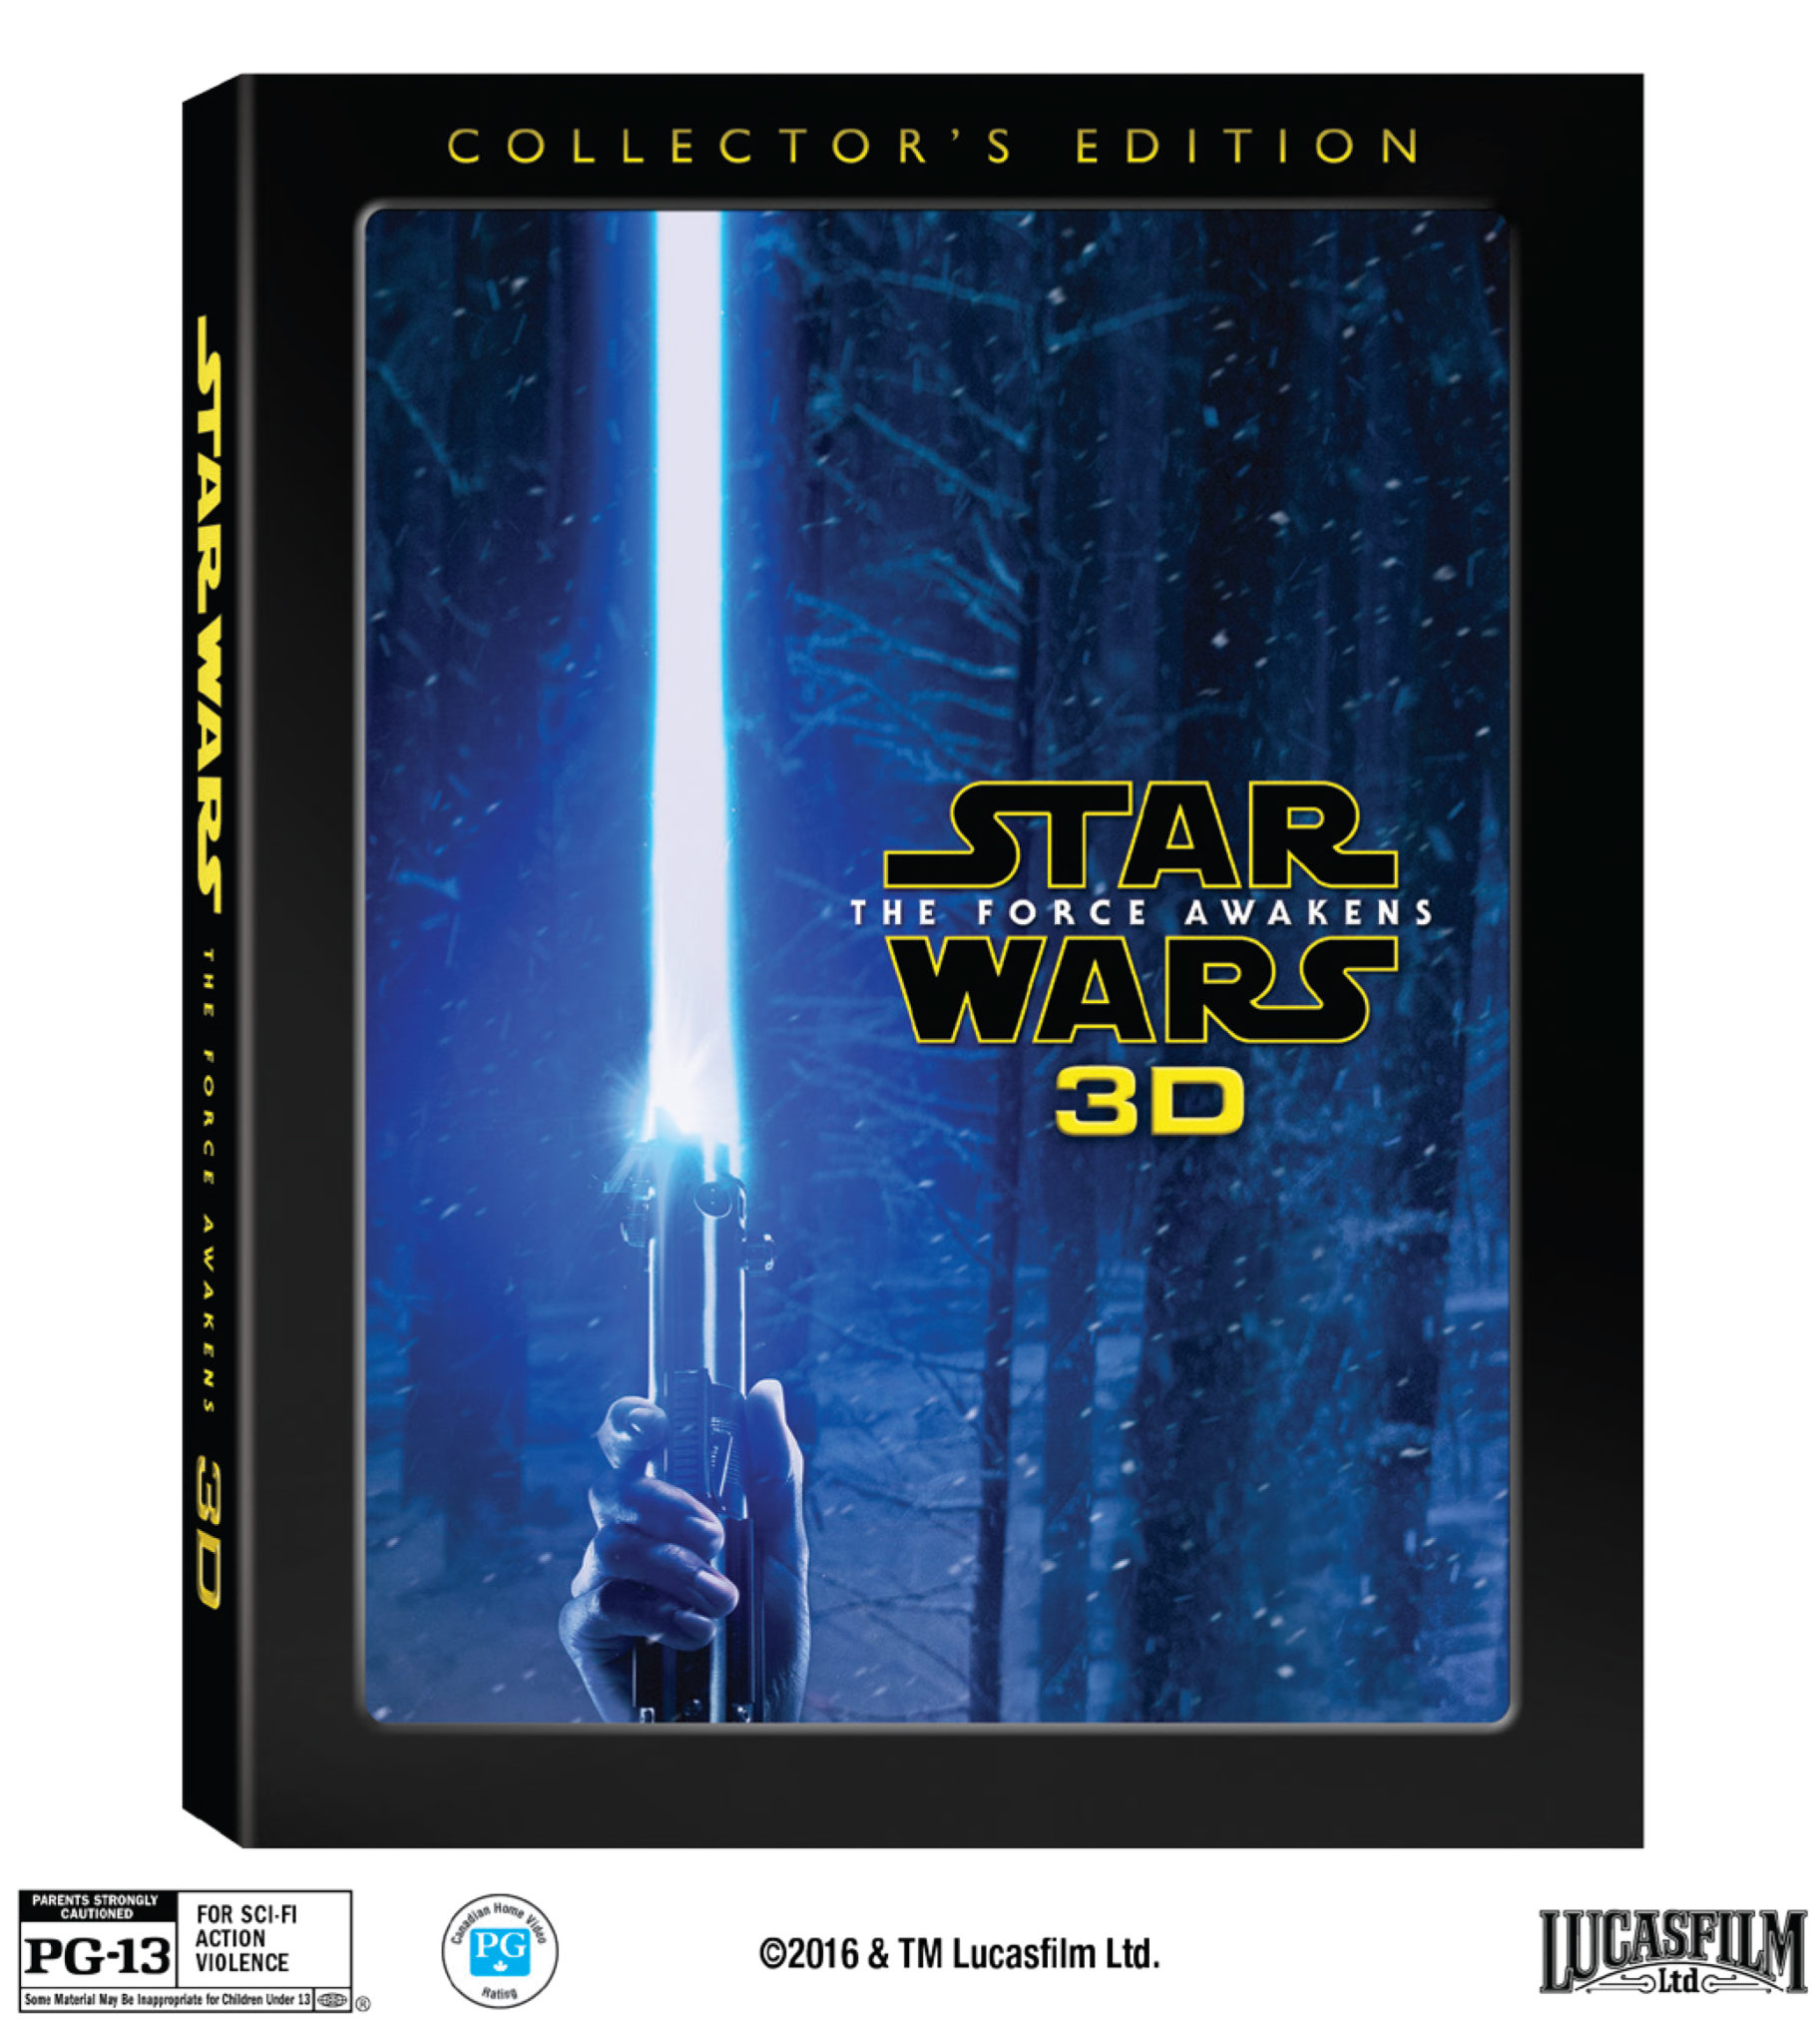 *UPDATE: “Star Wars: The Force Awakens” 3D Collector’s Edition is coming this November